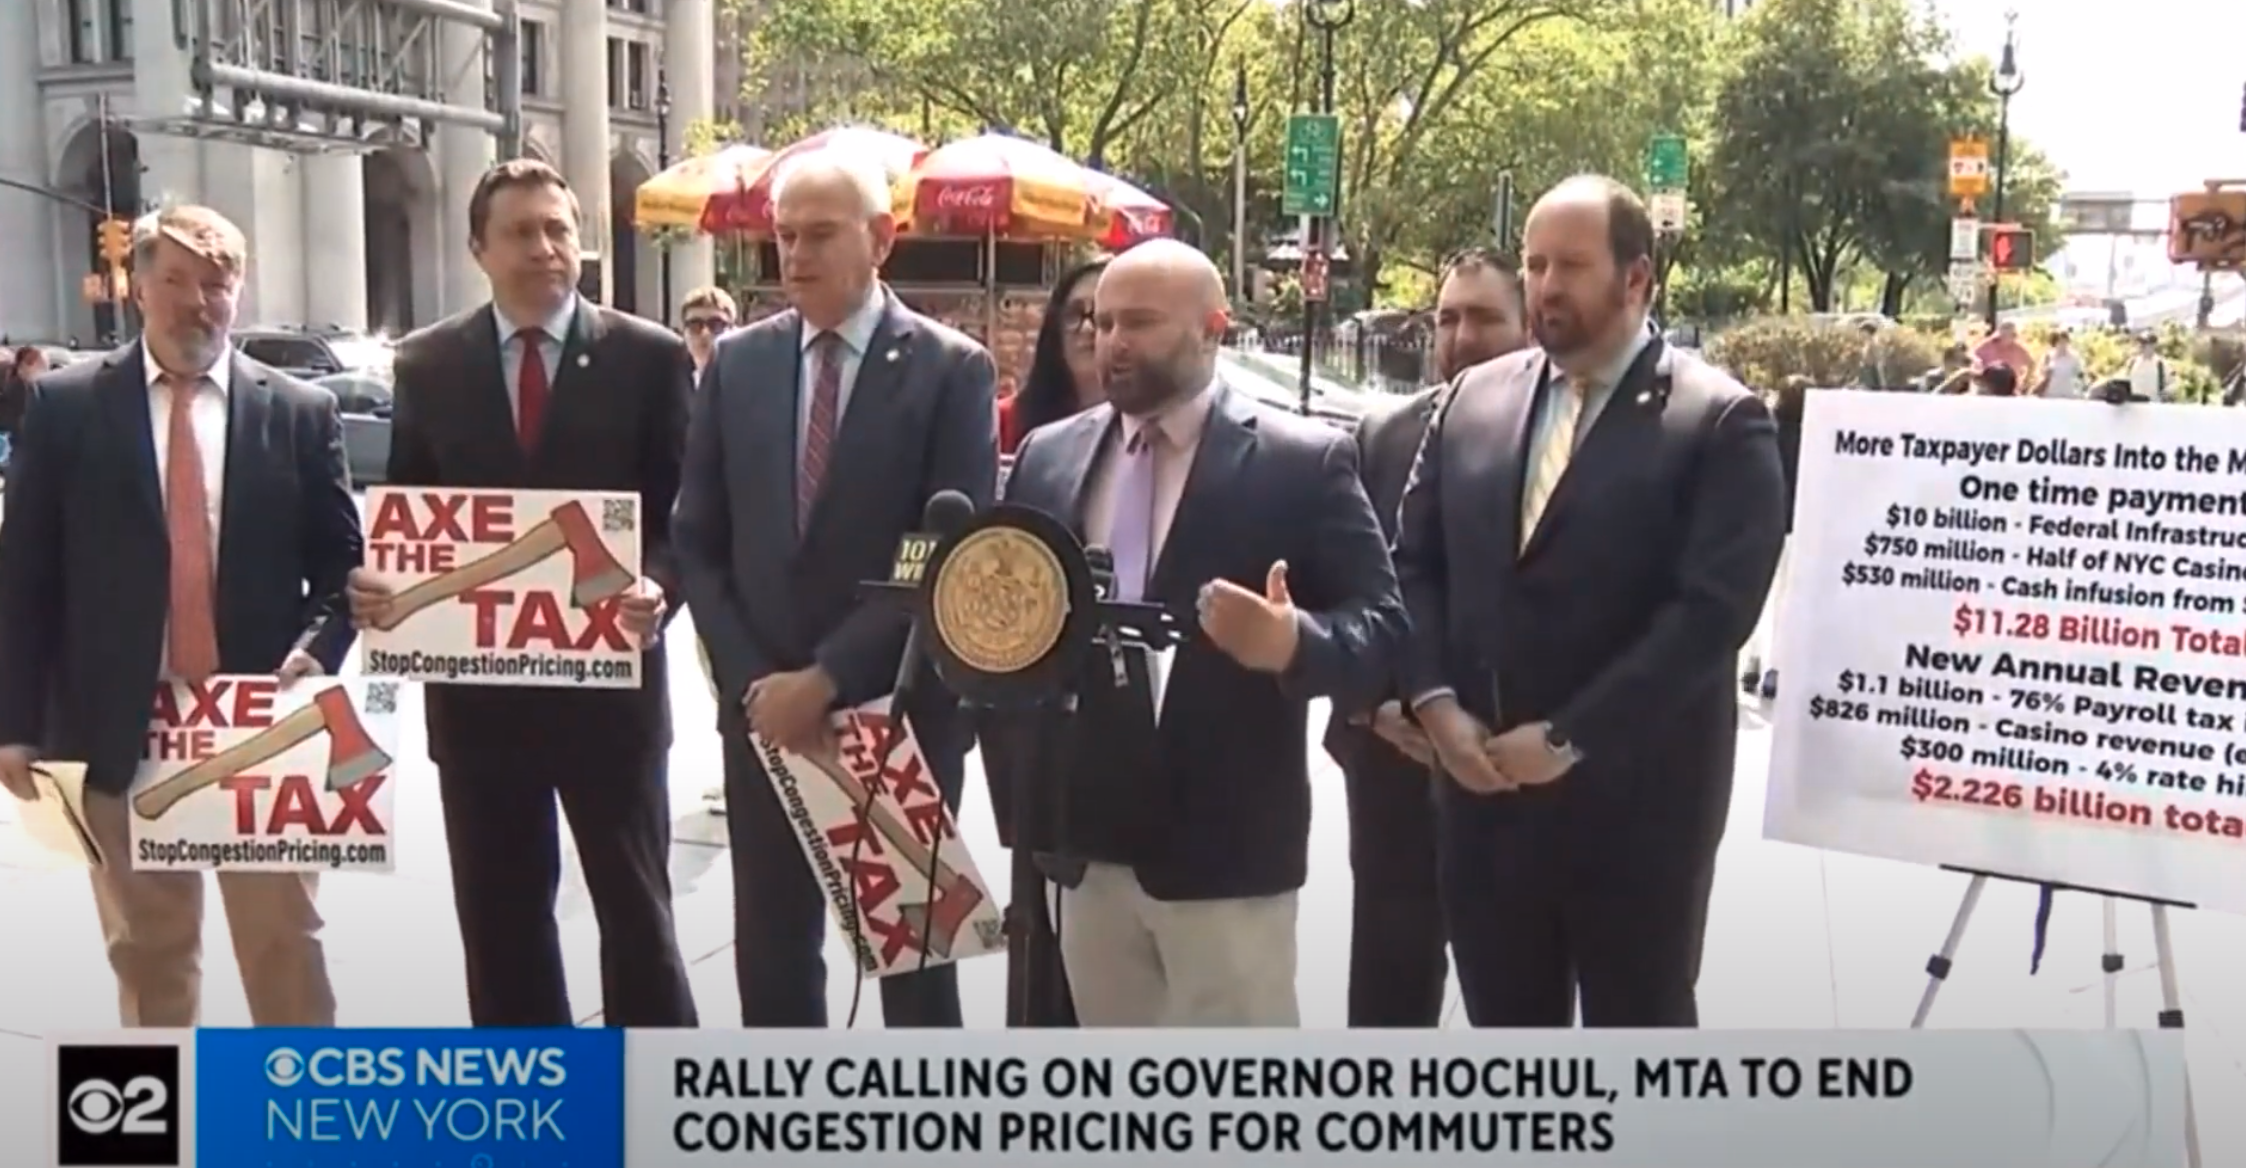 CBS News coverage of the Common Sense Caucus” congestion pricing rally.